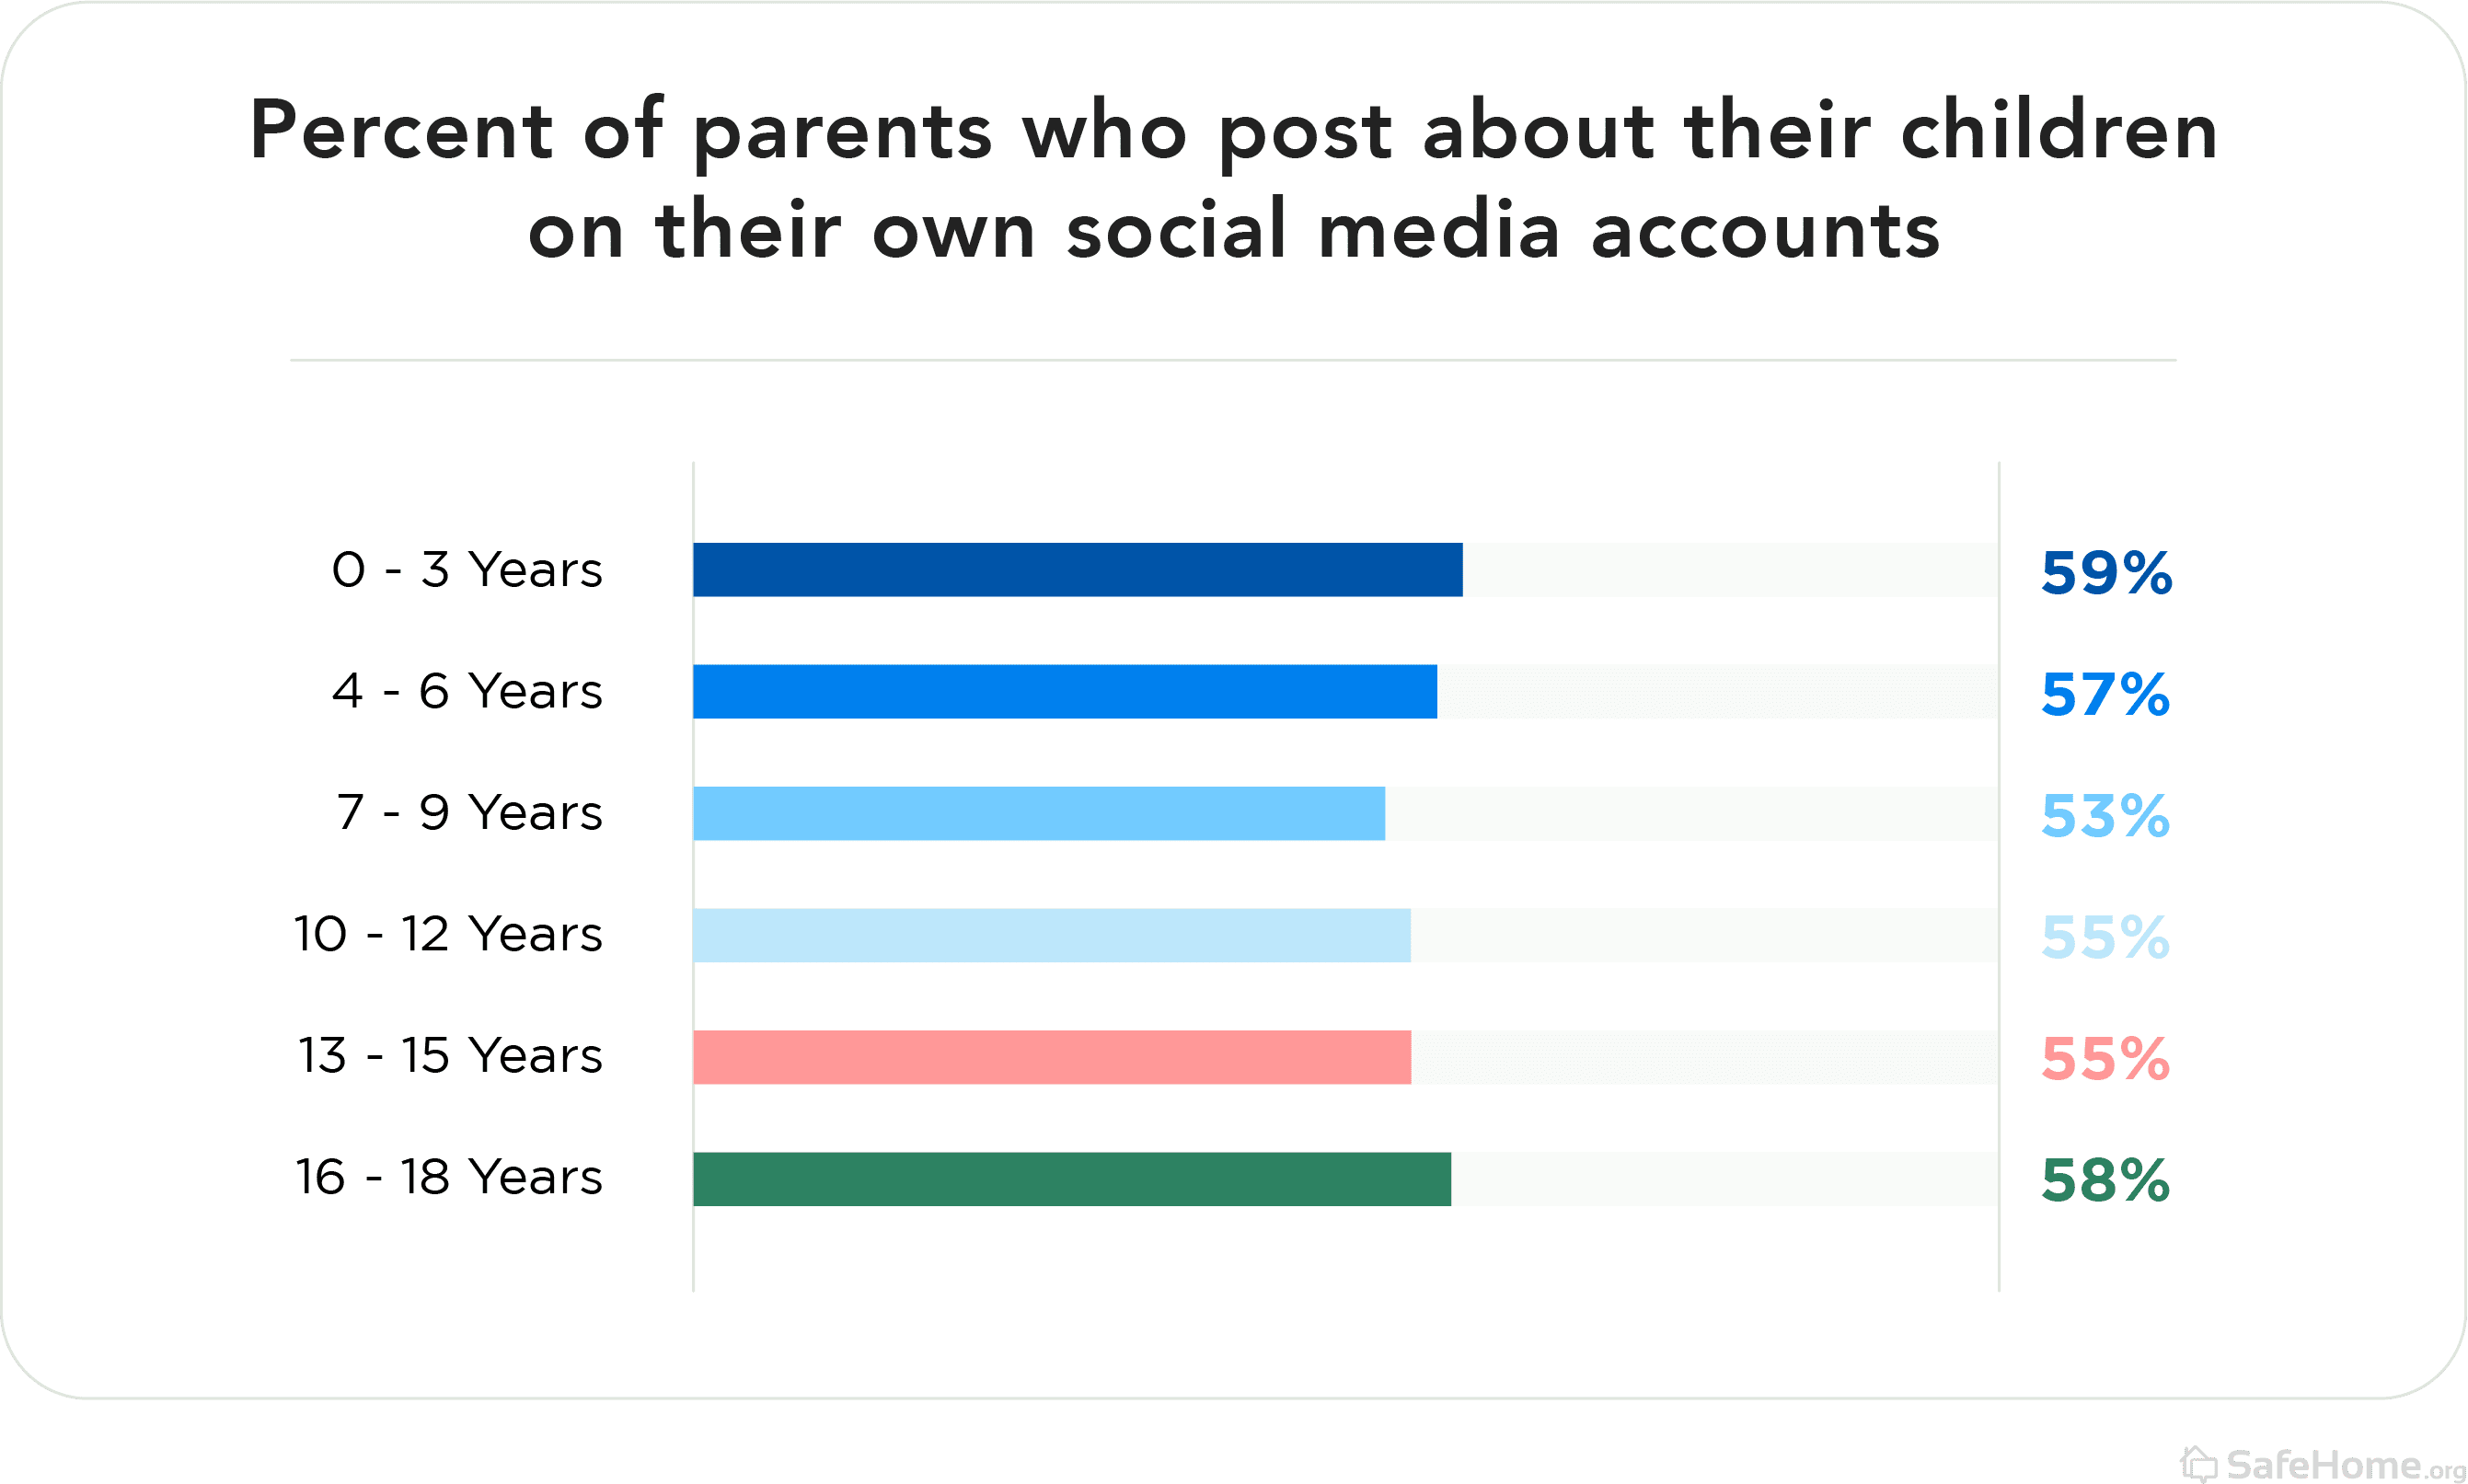 Percent of parents who post about their children on their own social media accounts